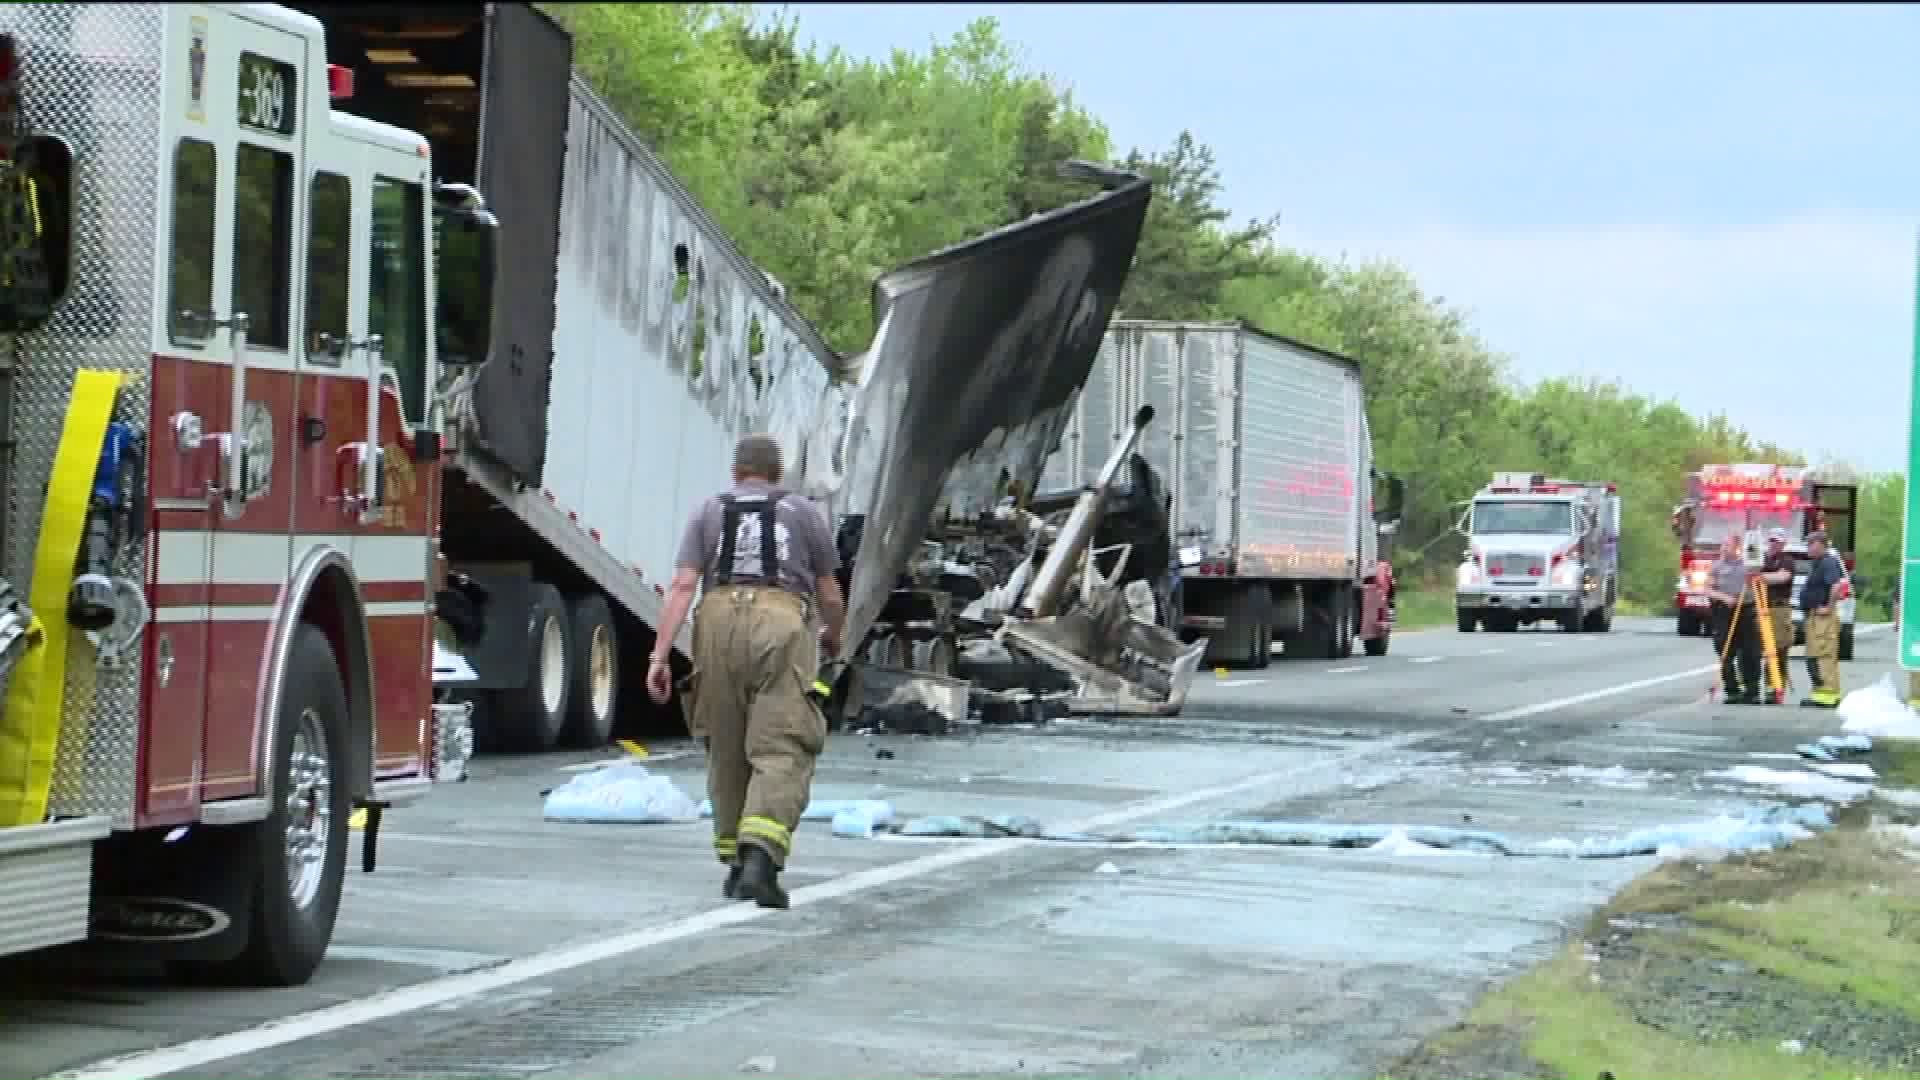 Two Killed in Multi-Vehicle Wreck on I-81 in Schuylkill County